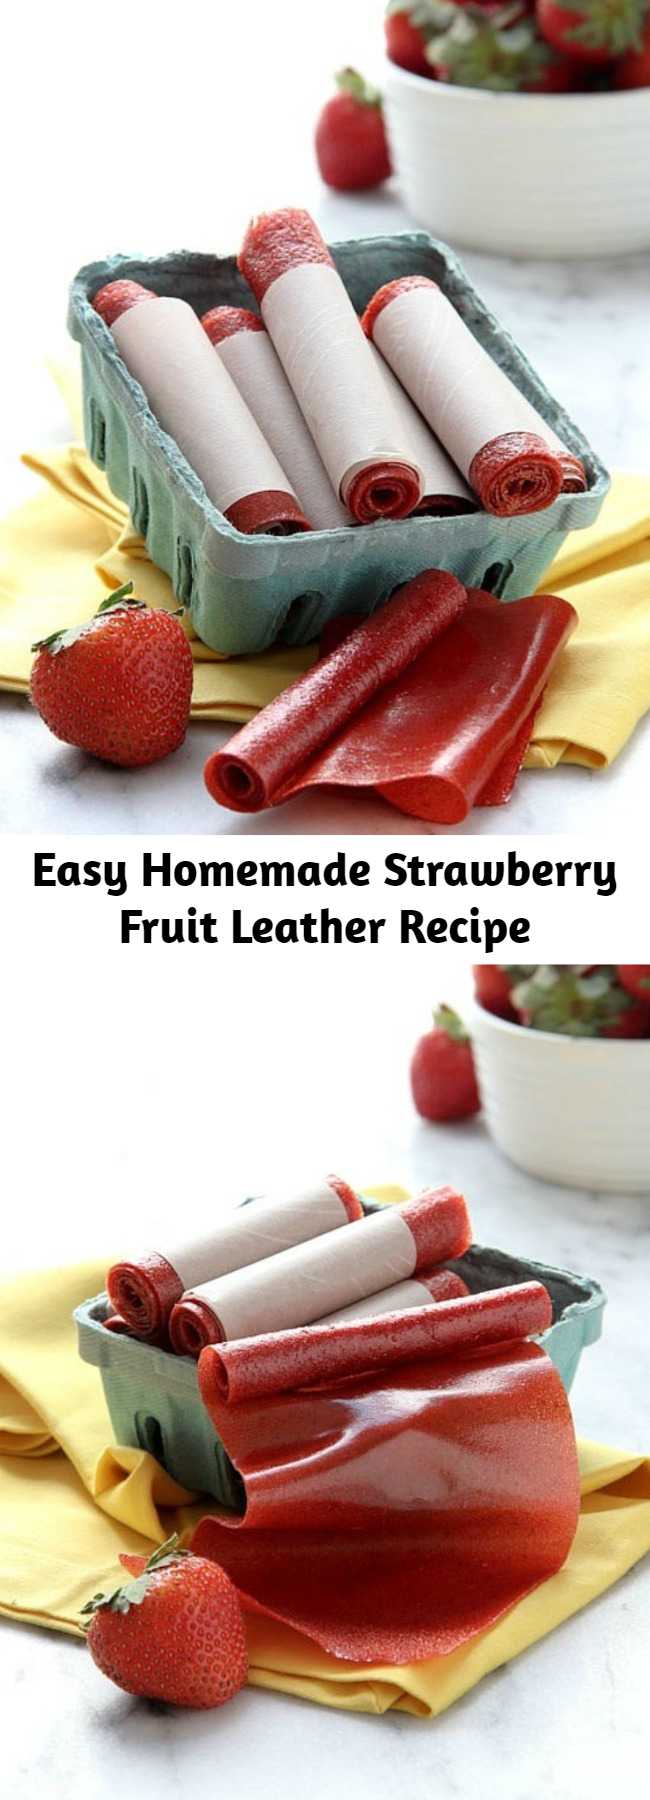 Easy Homemade Strawberry Fruit Leather Recipe - Easy homemade strawberry fruit leather, requiring only a few simple ingredients and an oven! Tastes just like your favorite fruit roll-up, only better.